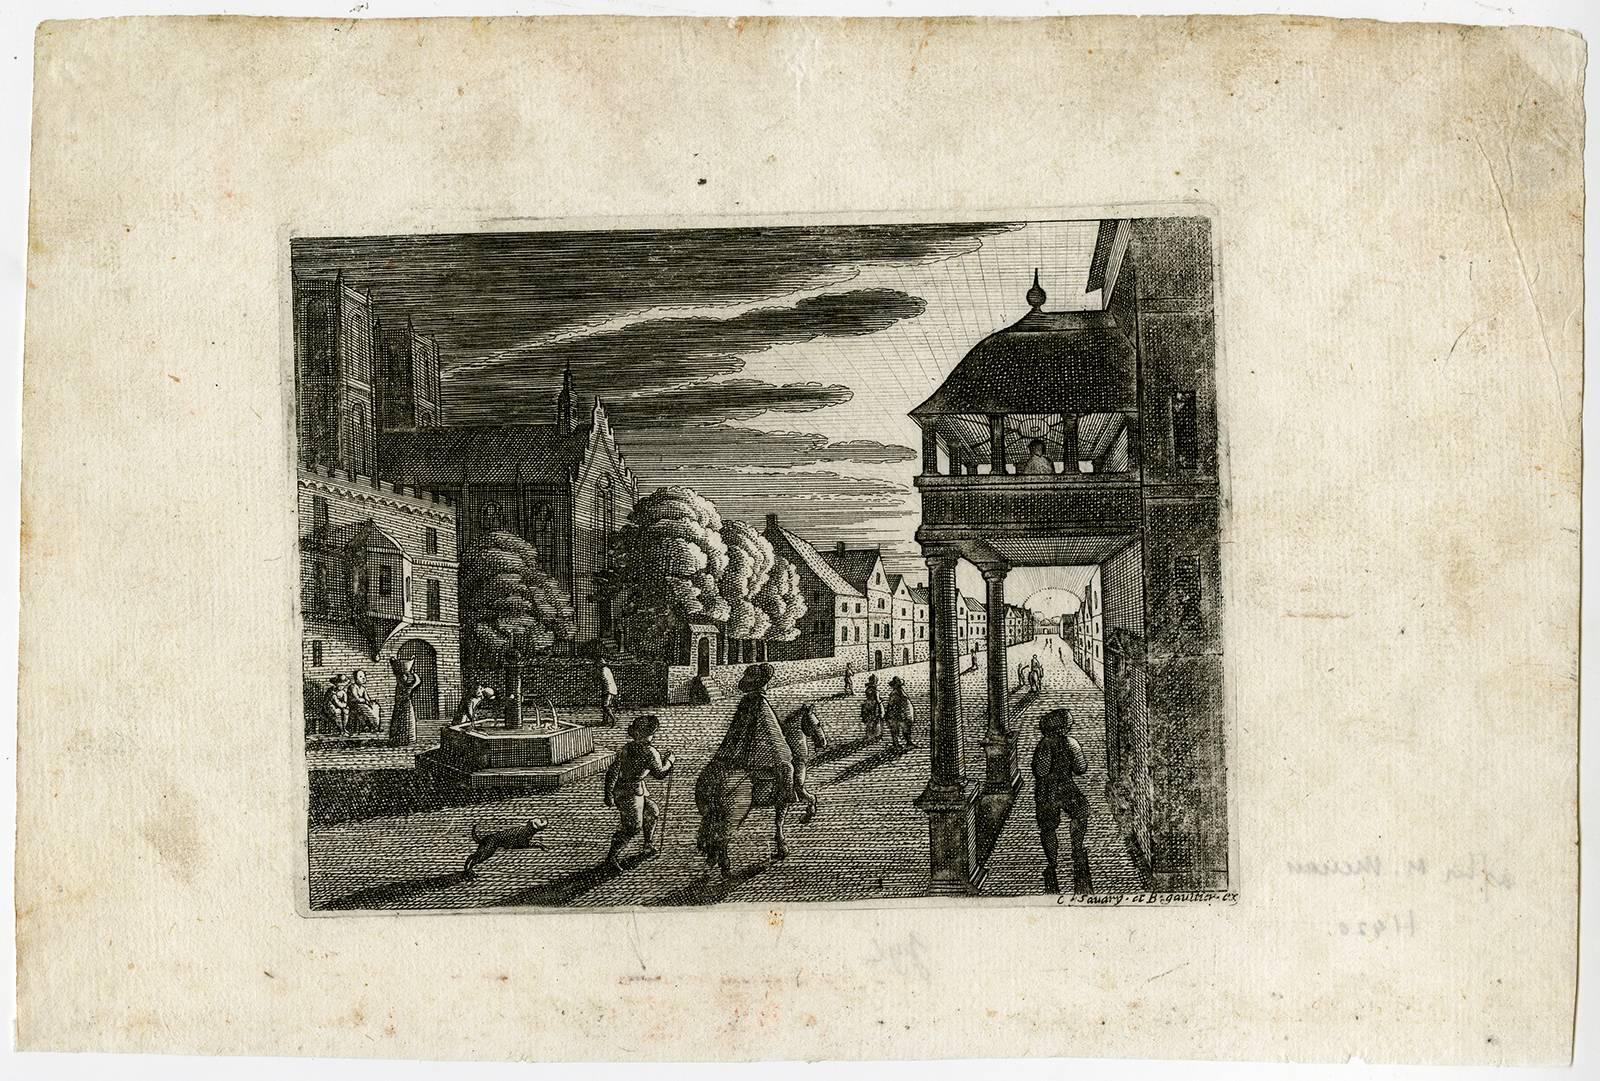 Unknown Figurative Print - Untitled - A street scene with the sun setting.